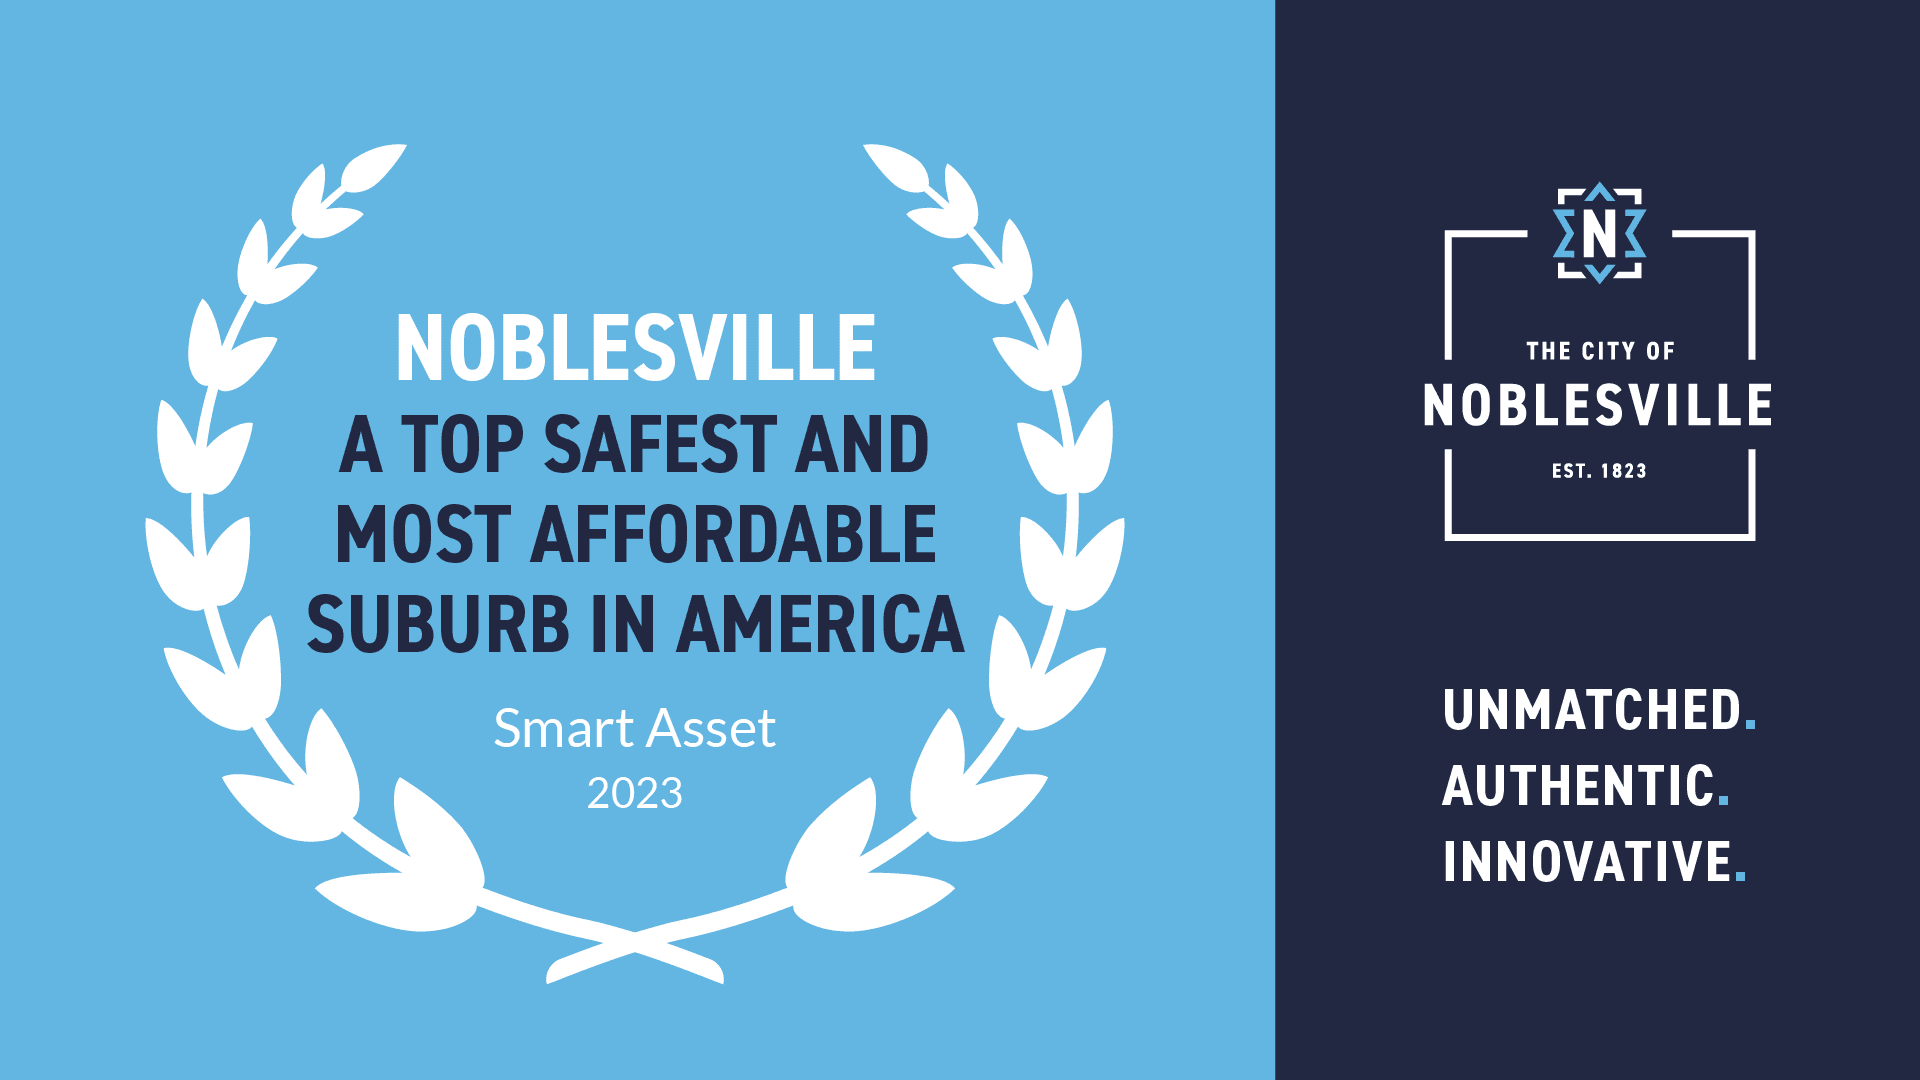 Noblesville, IN Named one of the Safest and Most Affordable Suburbs in America